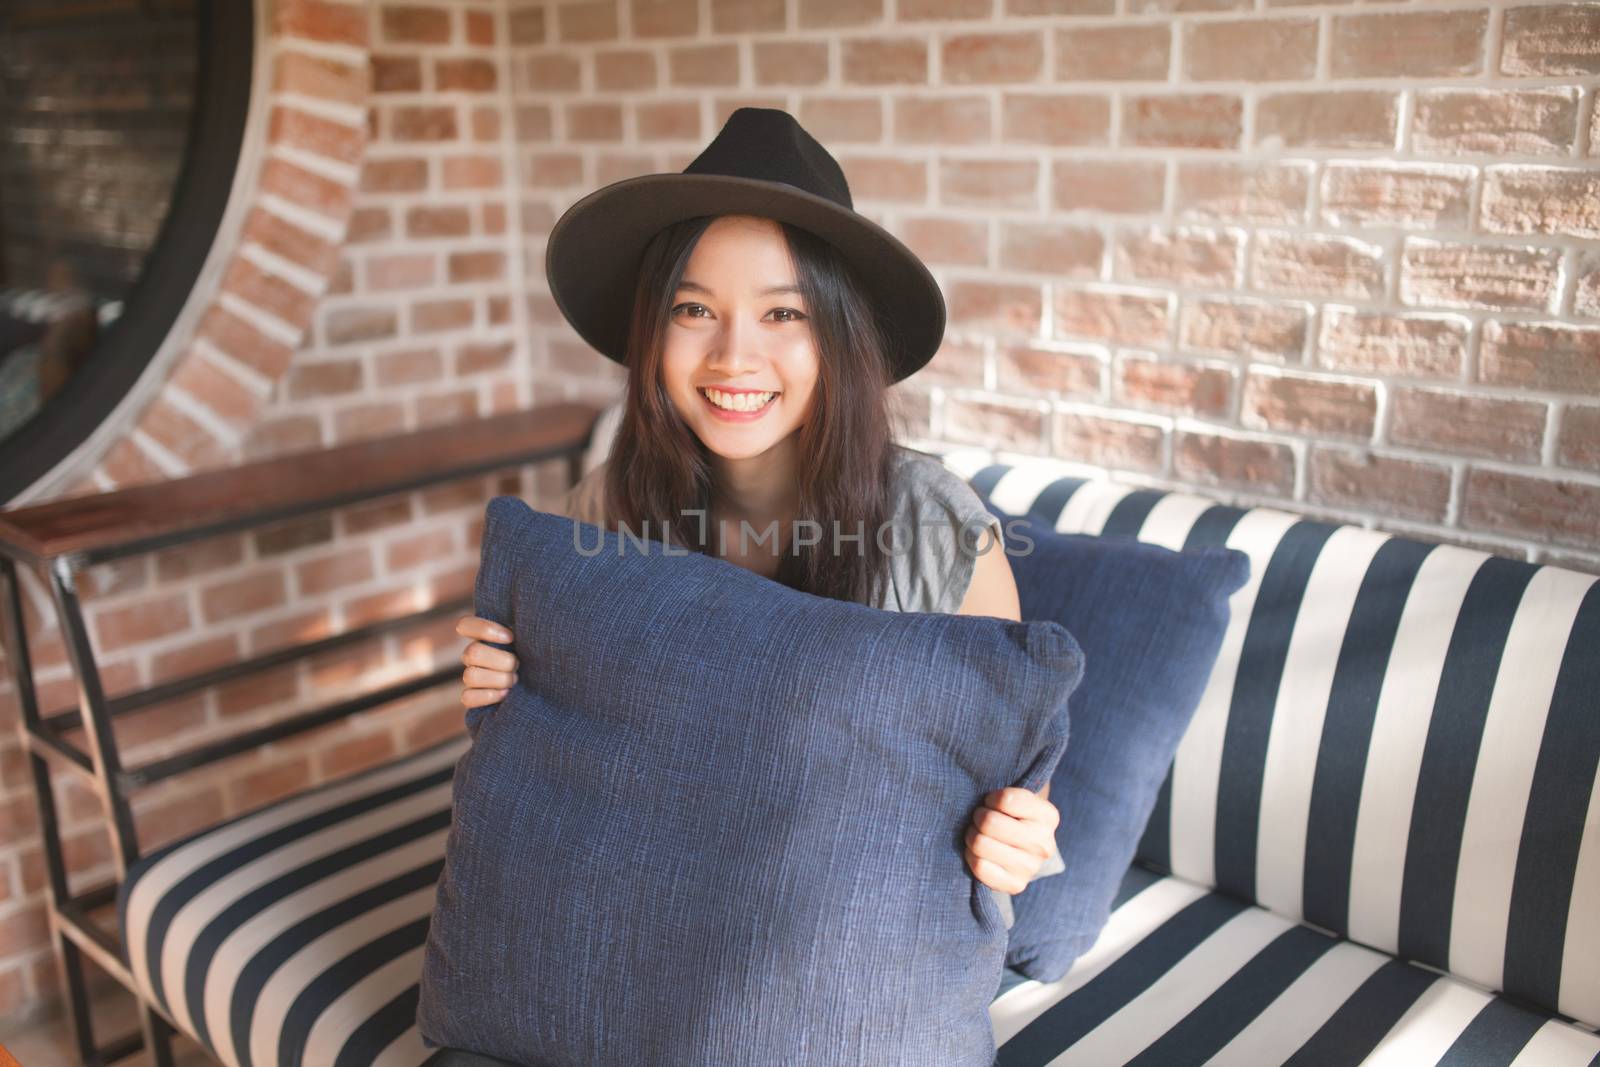 Woman smiling near rustic brick wall, Color process vintage style